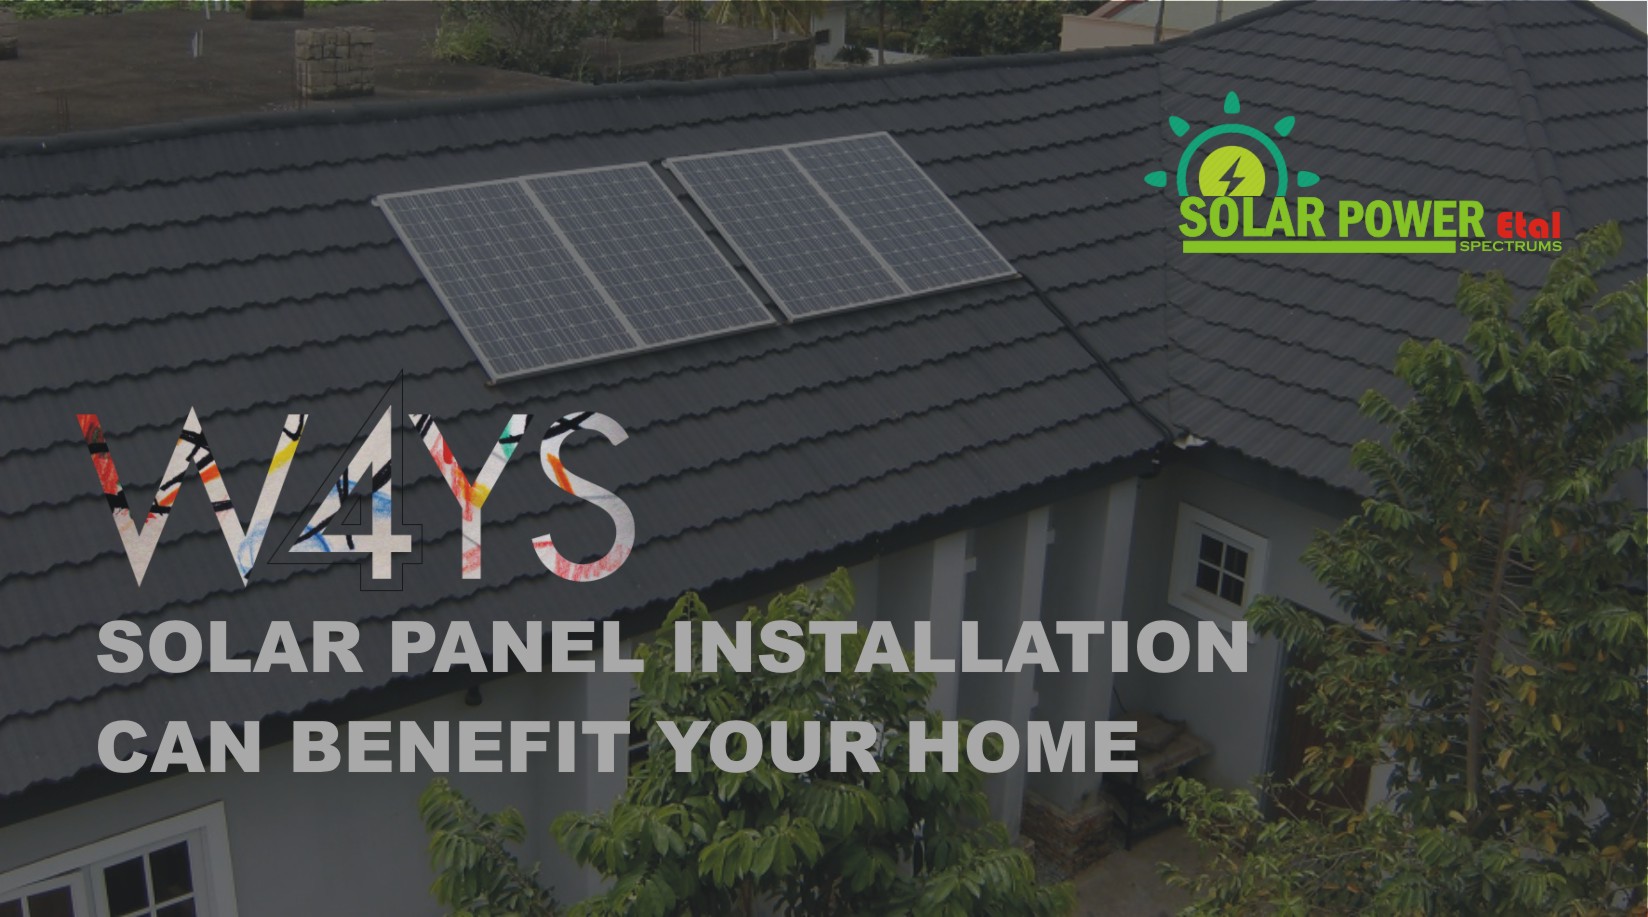 4 WAYS SOLAR PANEL INSTALLATION CAN BENEFIT YOUR HOME